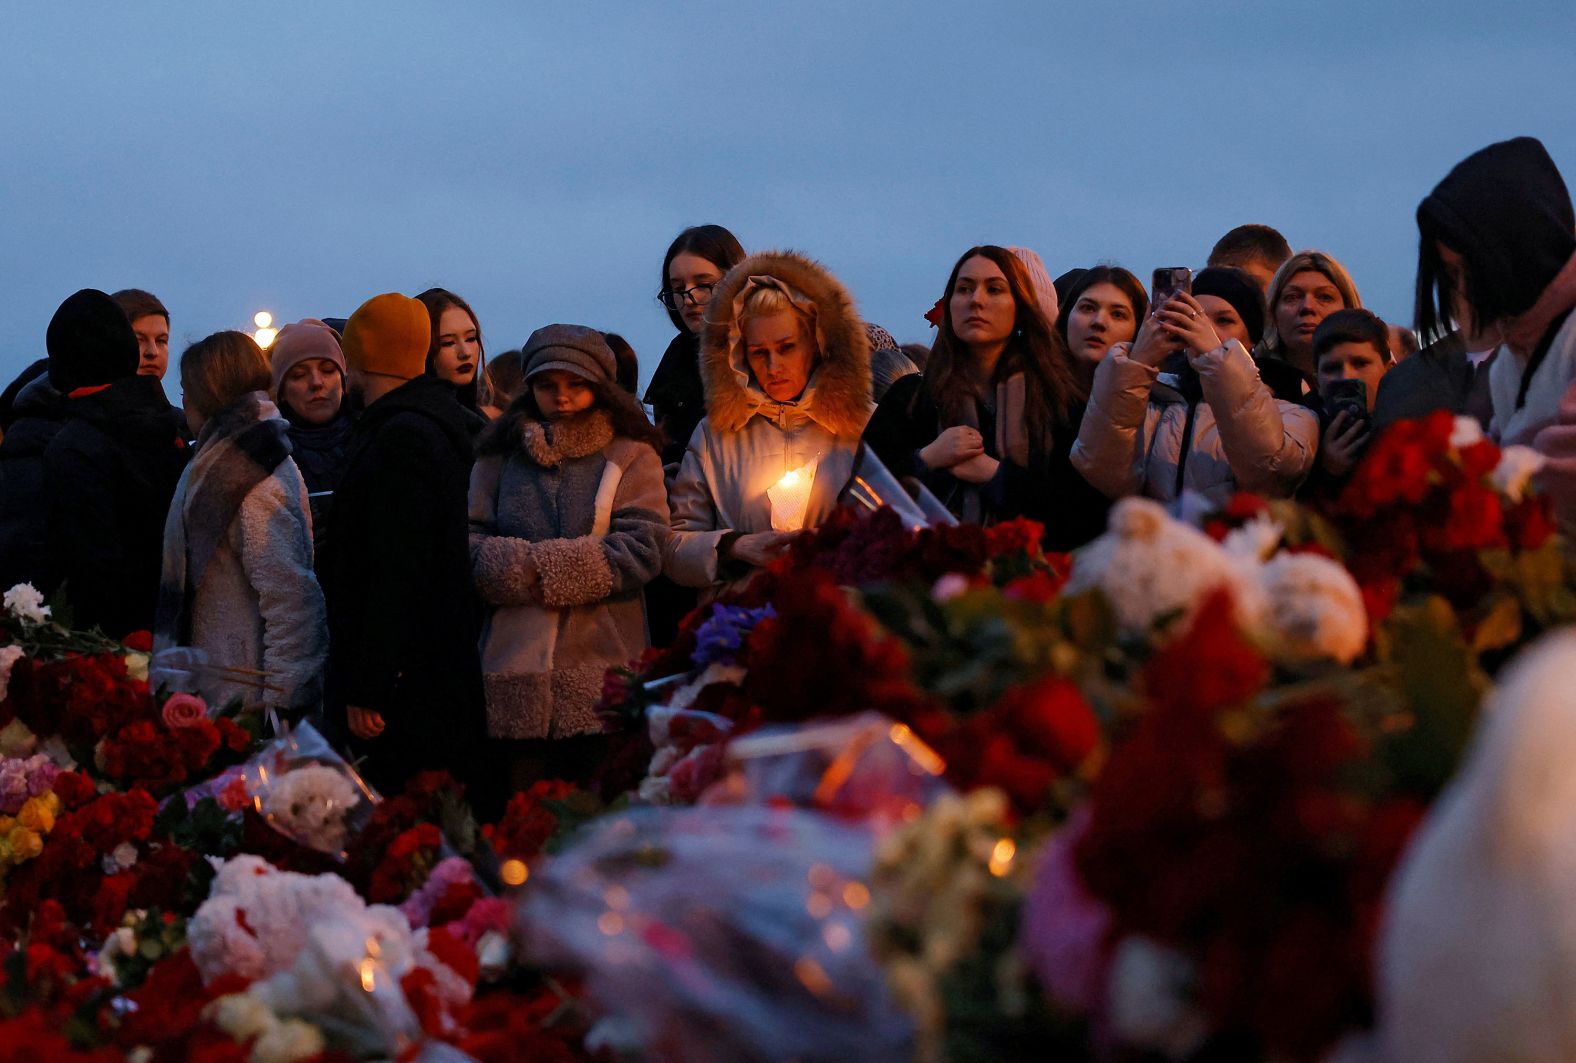 People in Moscow gather at a makeshift memorial outside the Crocus City Hall concert venue on Saturday, March 23, to remember those who were killed in a terrorist attack there the day before.